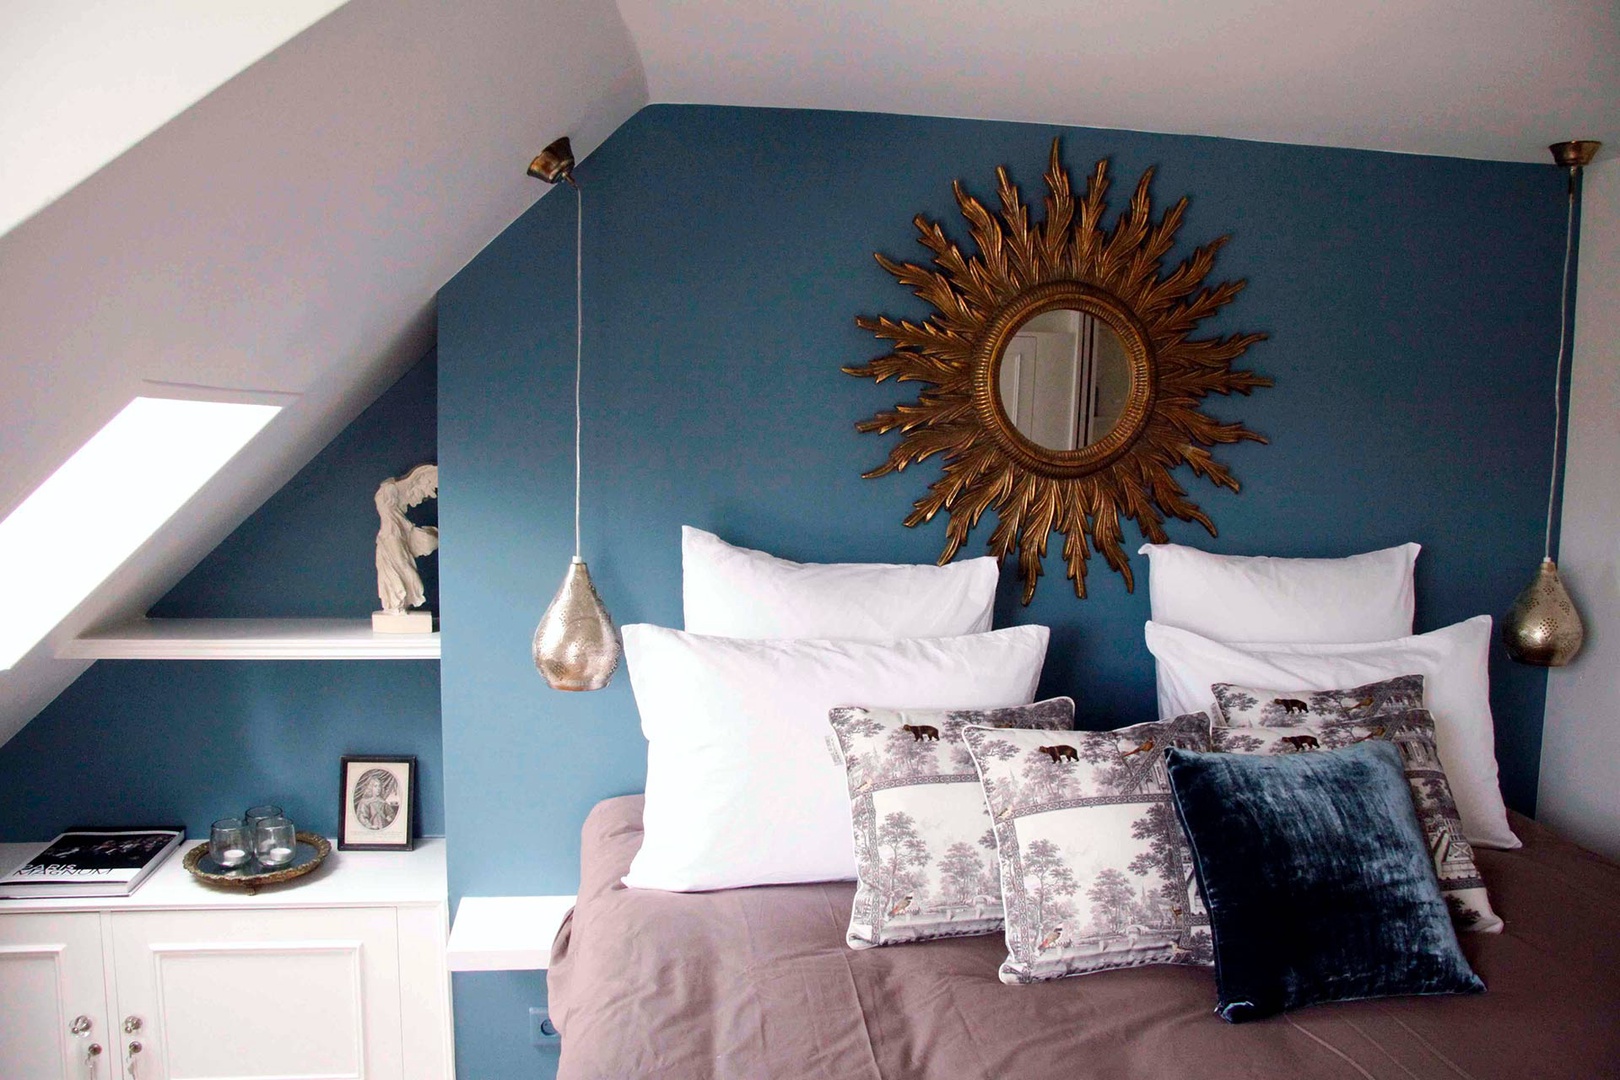 Artistic decorative touches in the bedroom.